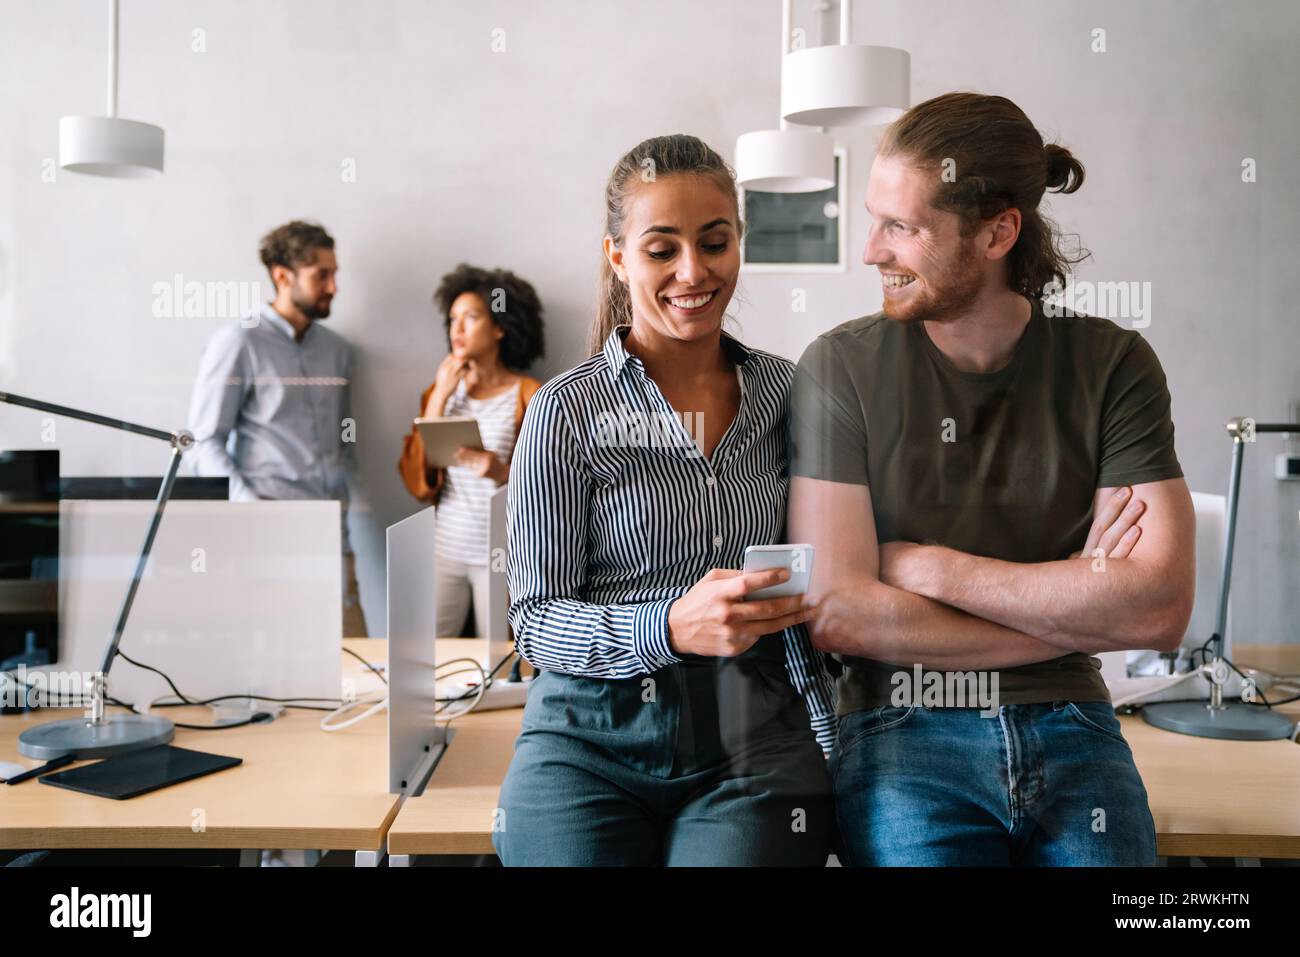 Portrait of creative business team working, smiling together at startup company. Stock Photo